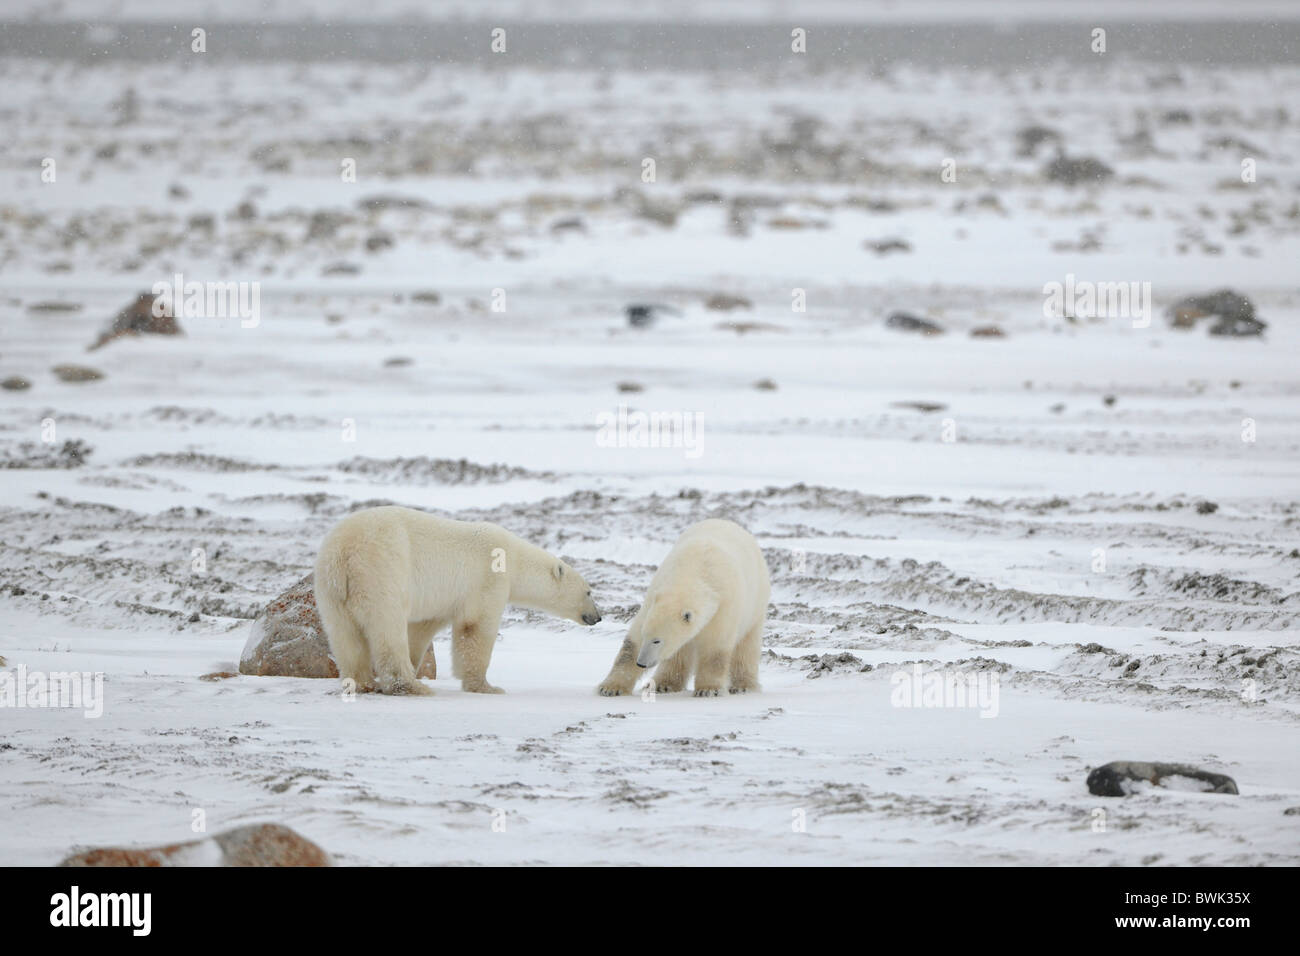 Meeting. Two polar bears have met and sniff each other. Tundra in snow. A blizzard. Stock Photo